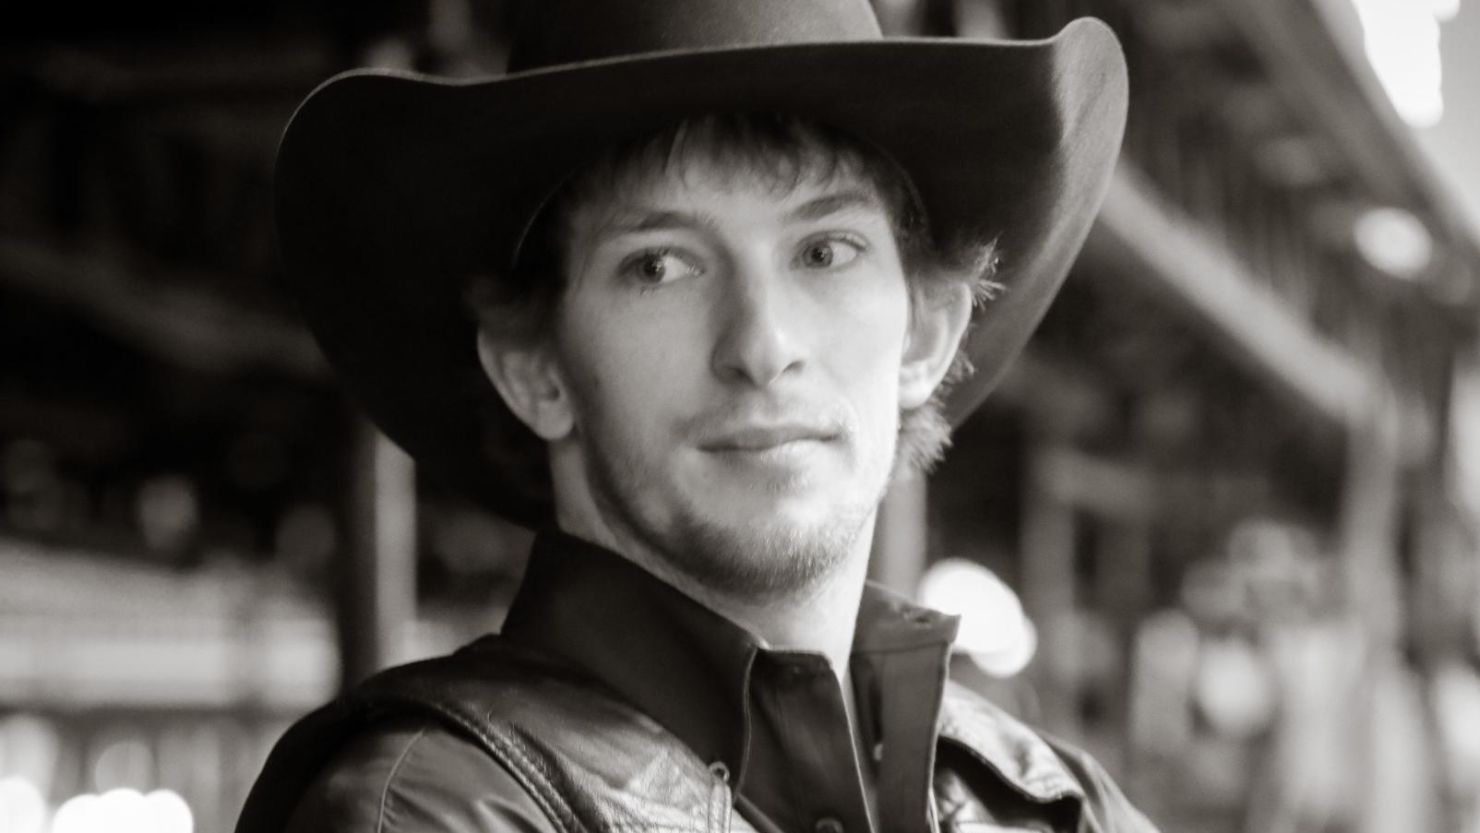 Mason Lowe, 25, had been a professional bull rider for seven years.